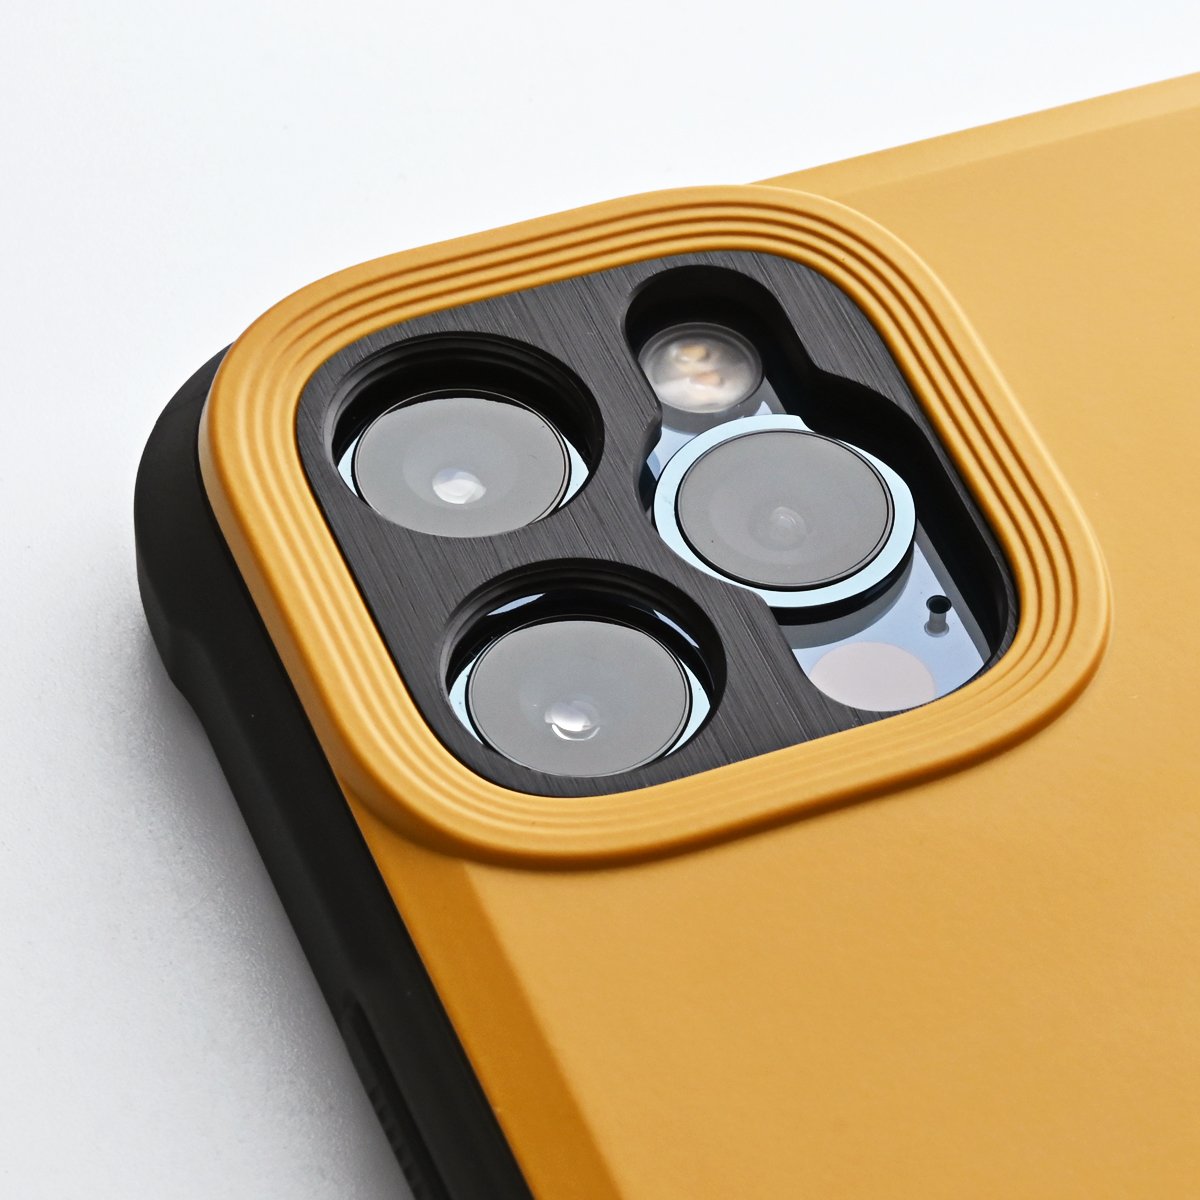 Add-on Lens Adapter for Wander Case